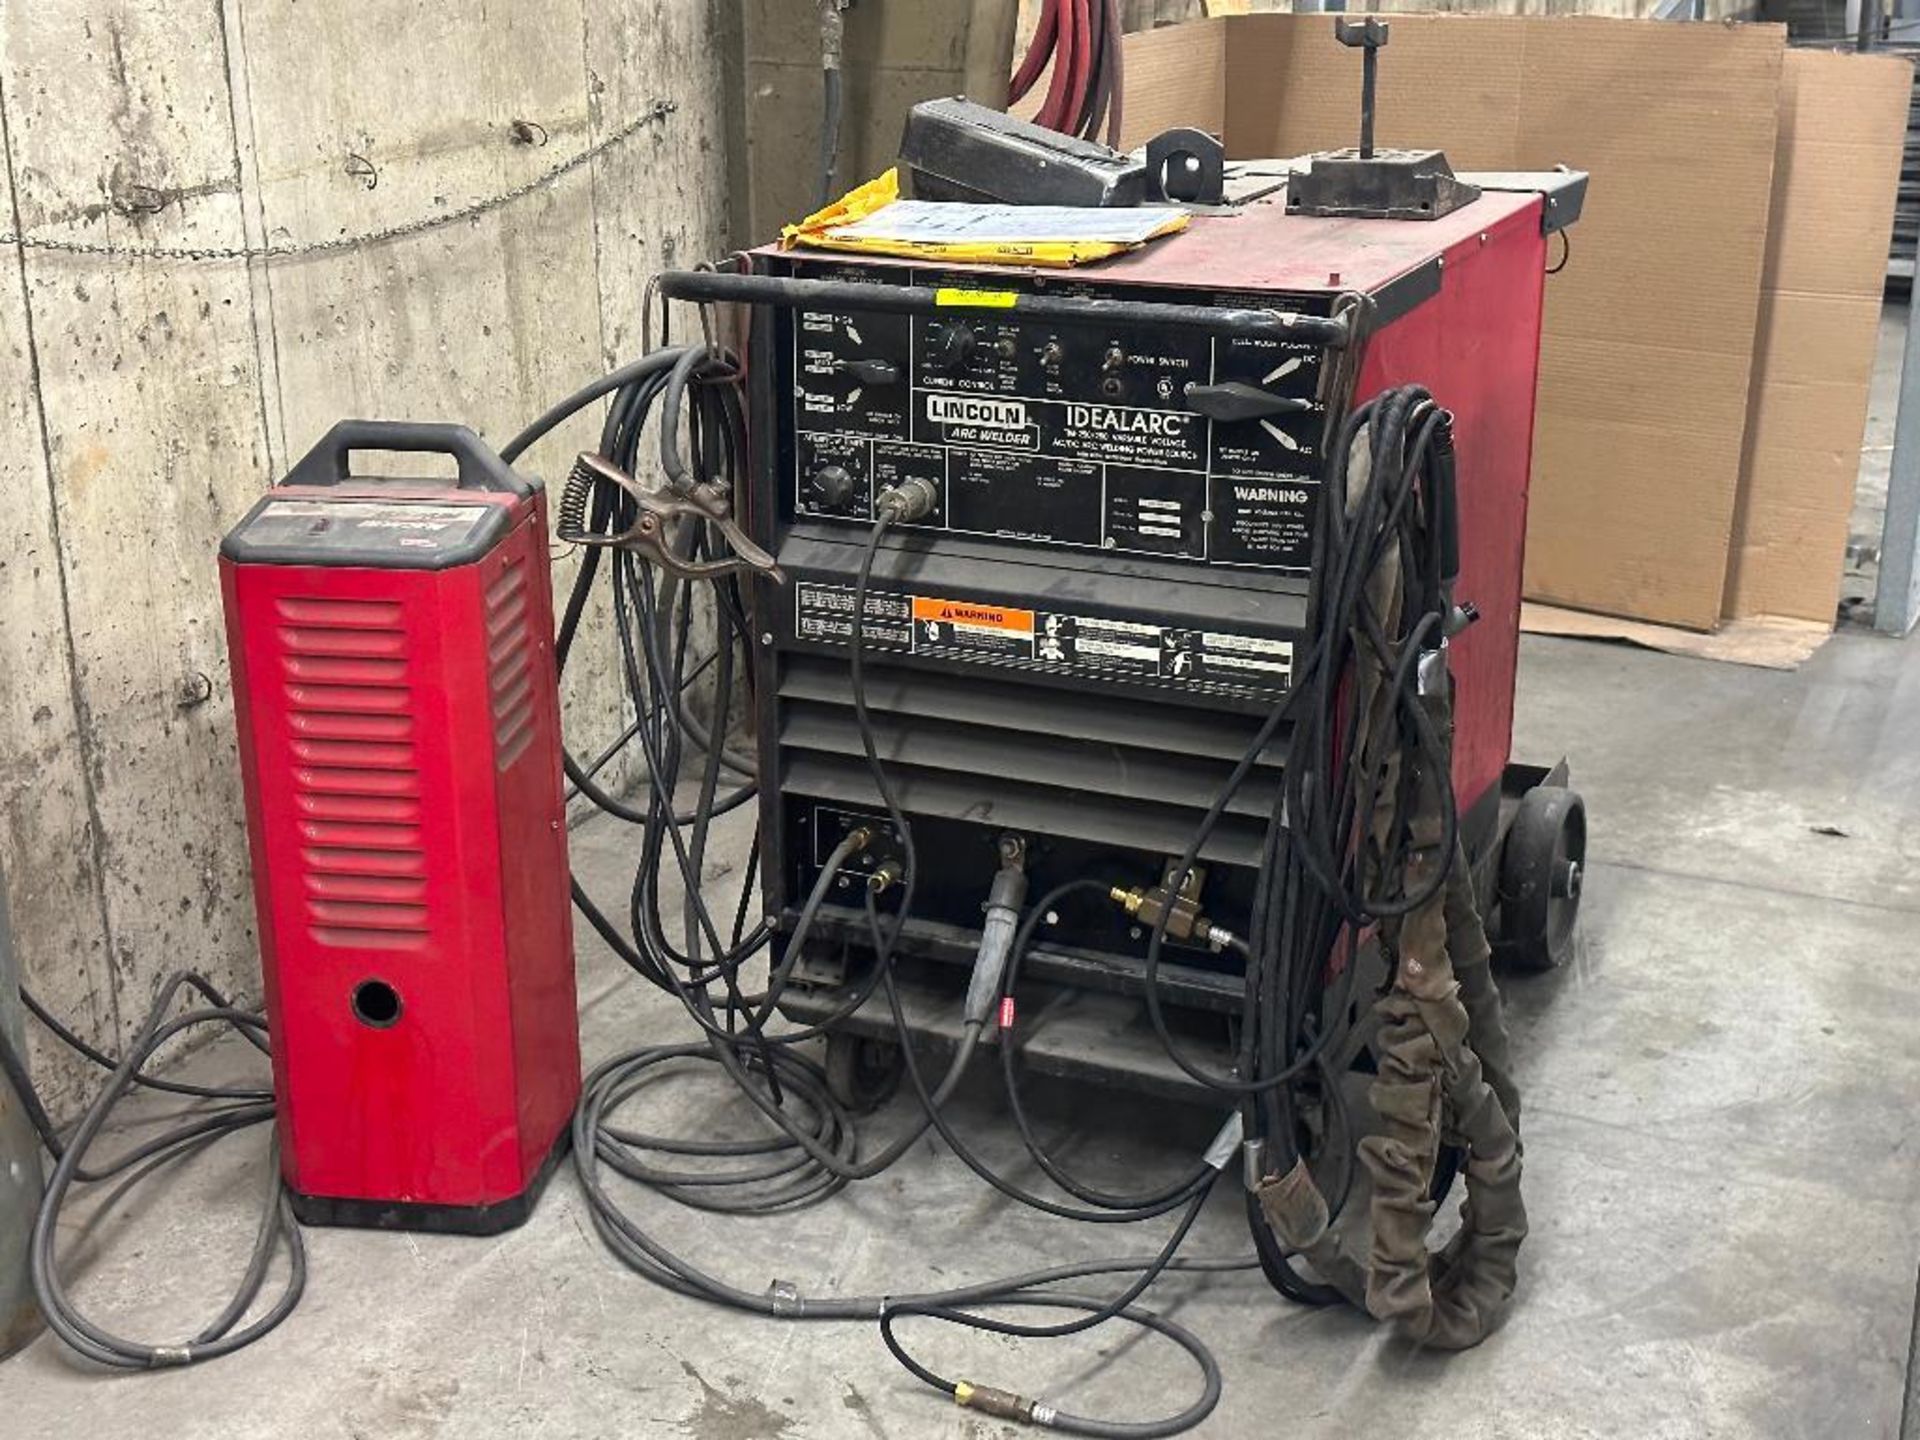 LINCOLN IDEALARC VARIABLE VOLTAGE ARC WELDER WITH LEADS AND ADDITIONAL FUEL TANK